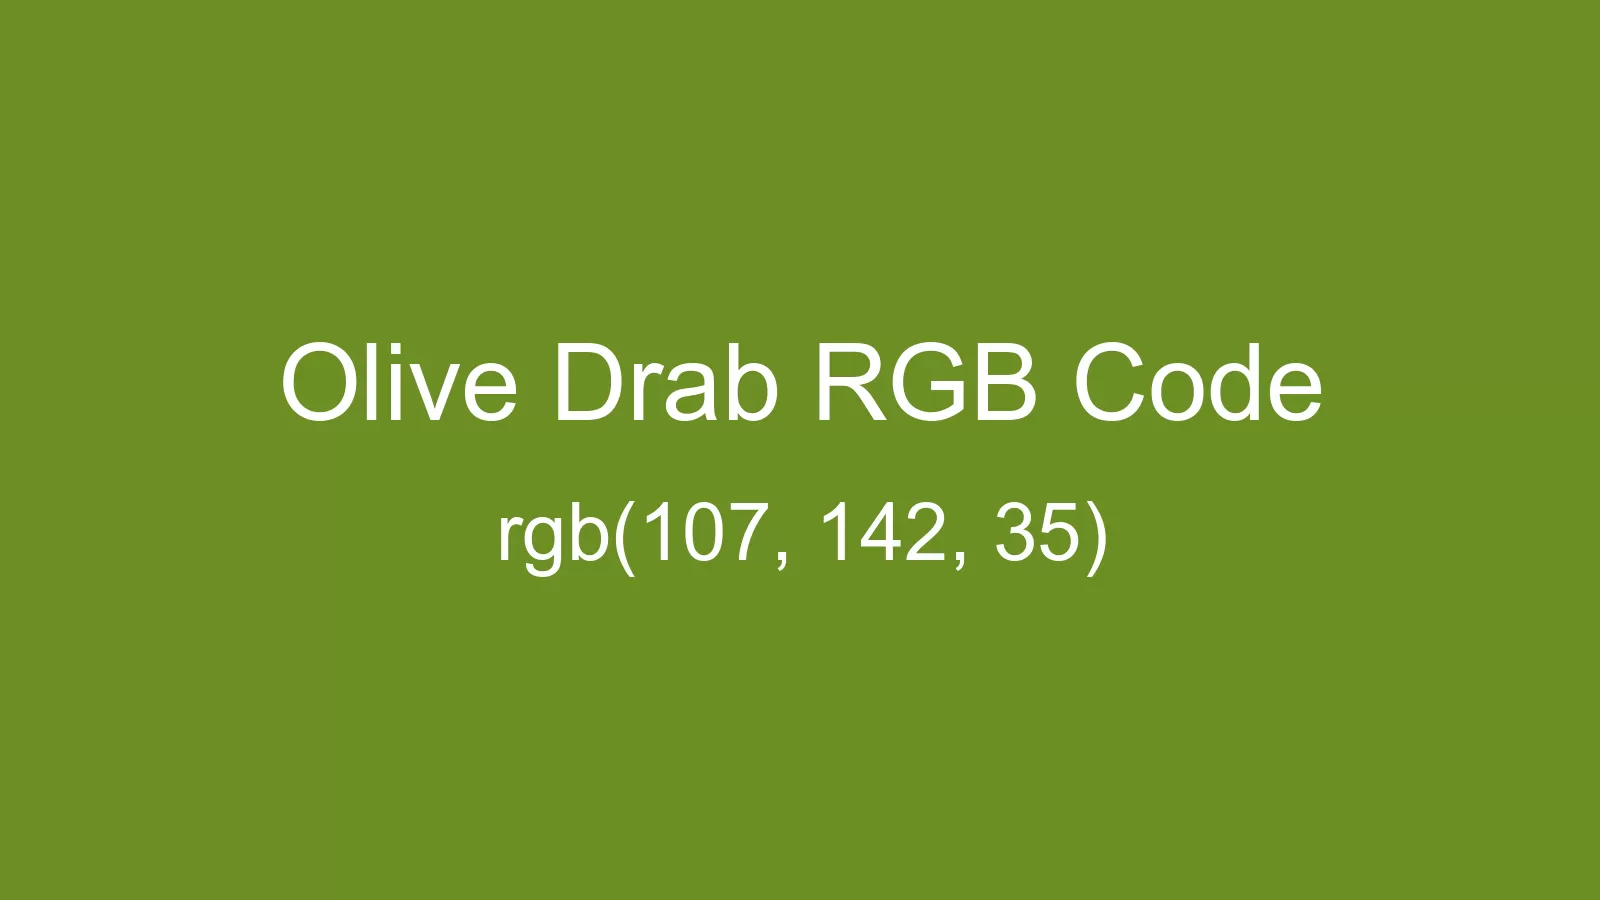 preview image of Olive Drab color and RGB code